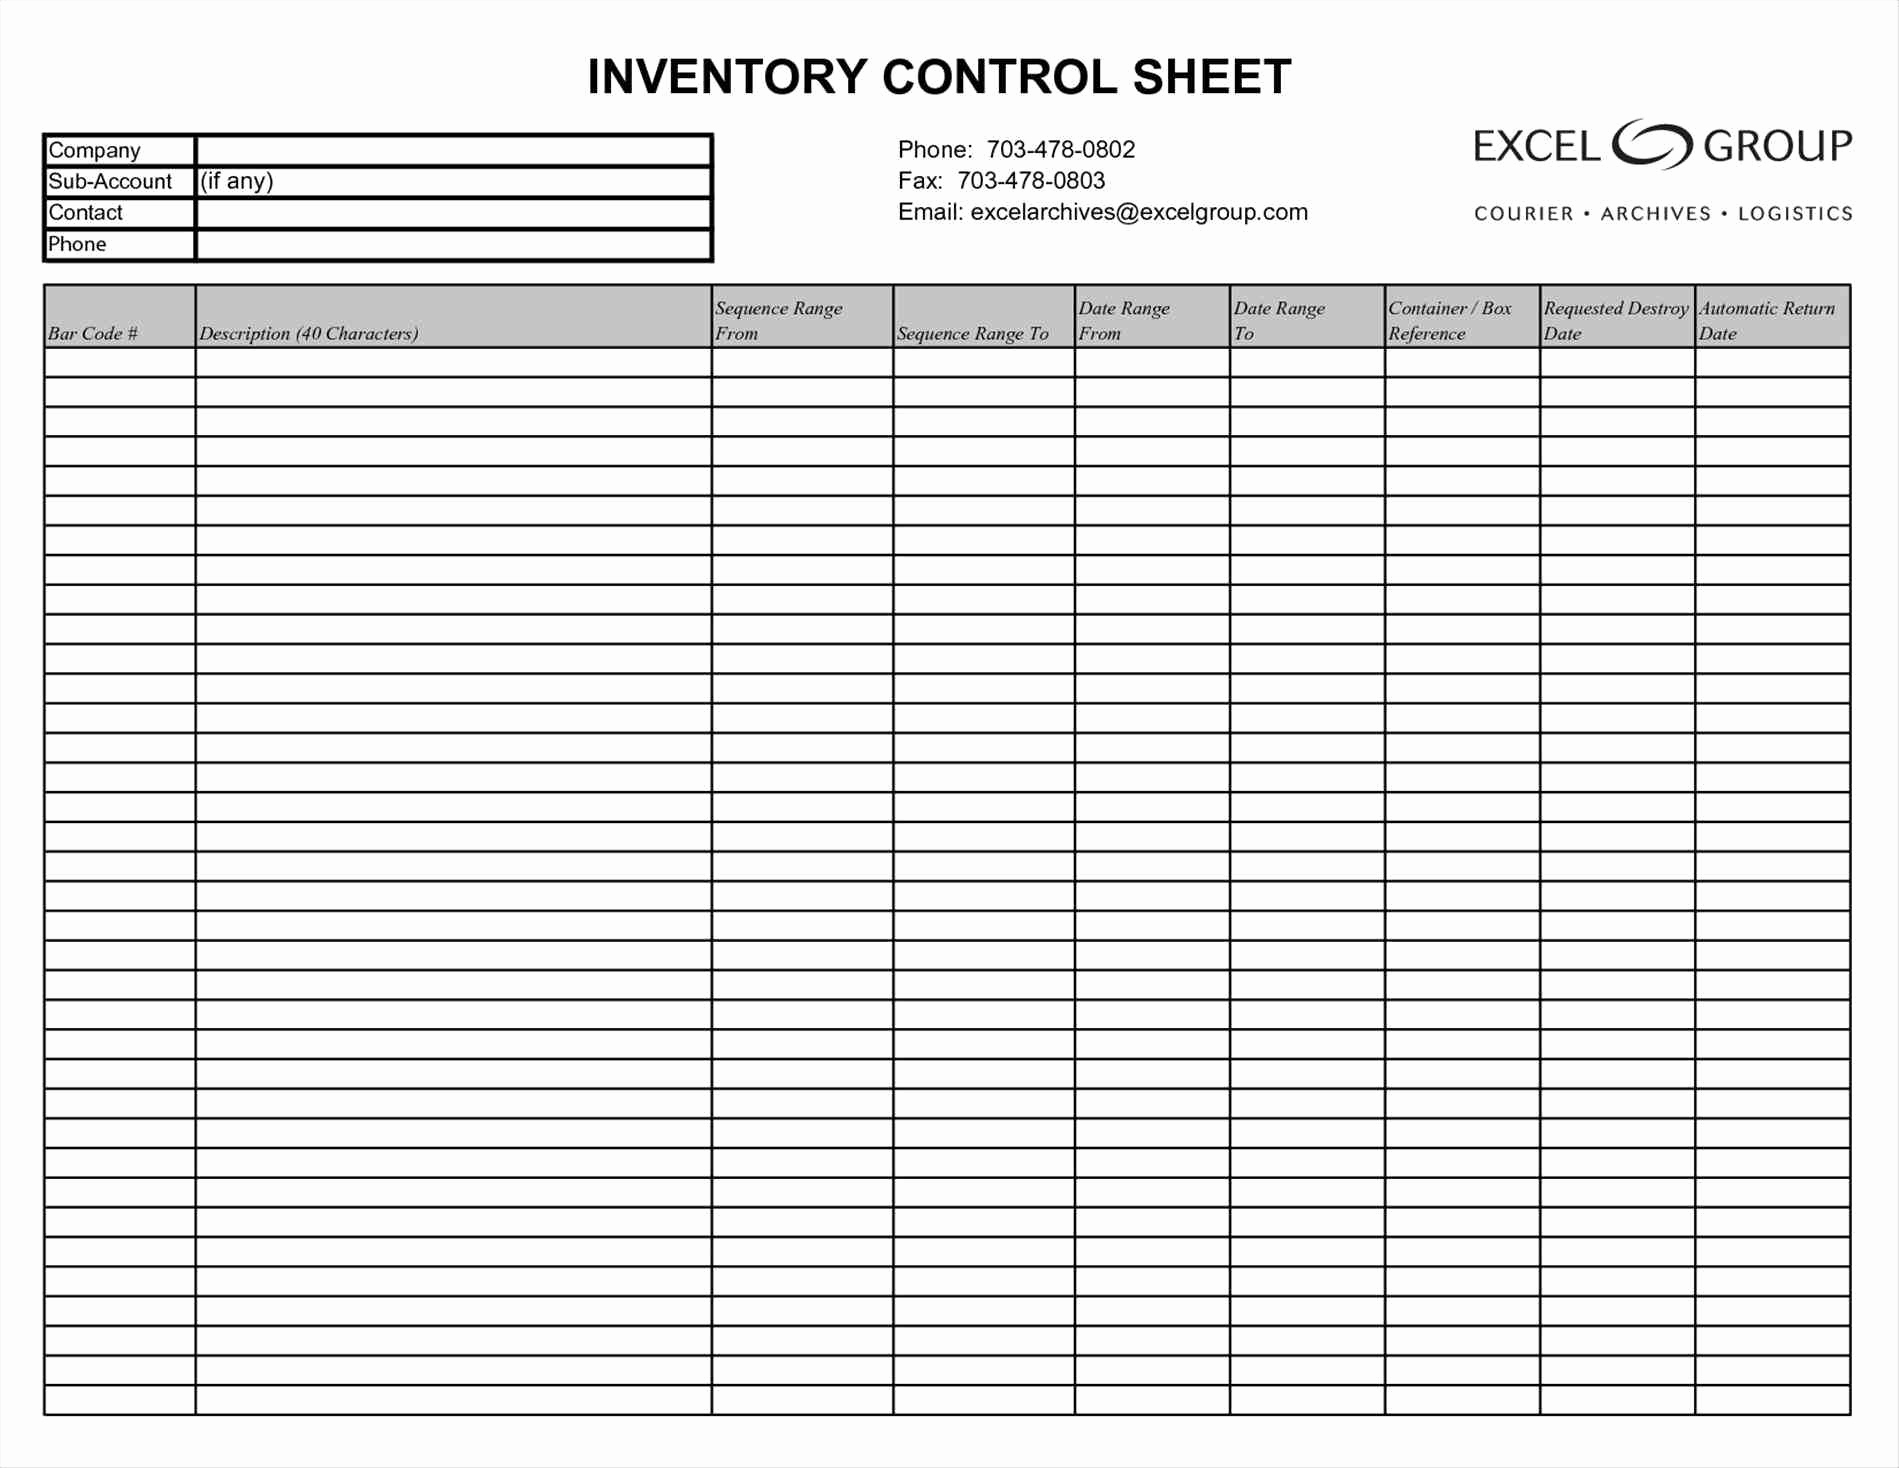 Clothing Store Inventory Spreadsheet Template Pertaining To Clothing Inventory Spreadsheet  Charlotte Clergy Coalition